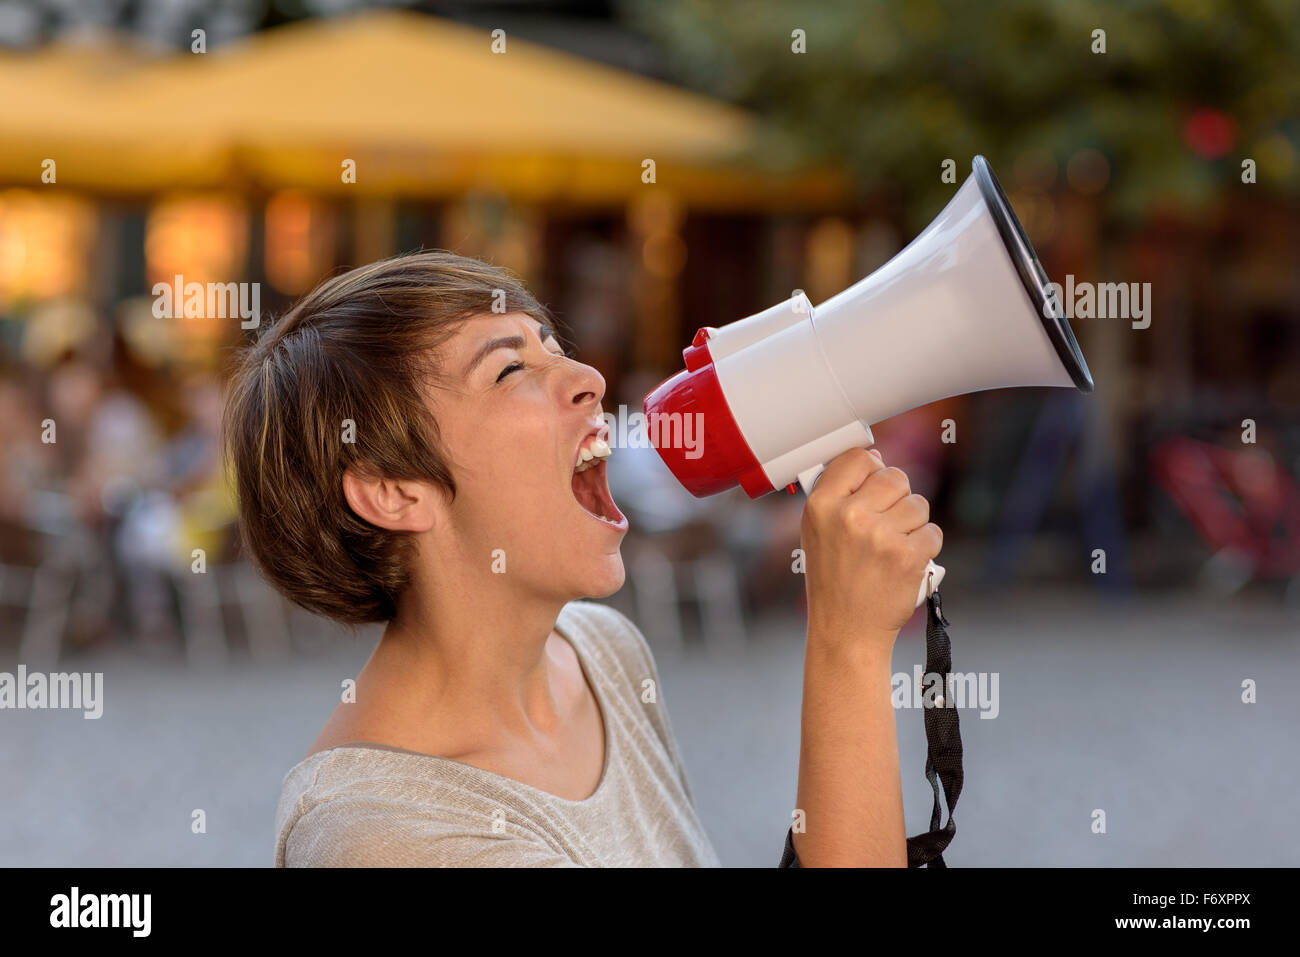 Angry young woman yelling into a megaphone as she stands on an urban street venting her frustrations during an open-air rally Stock Photo